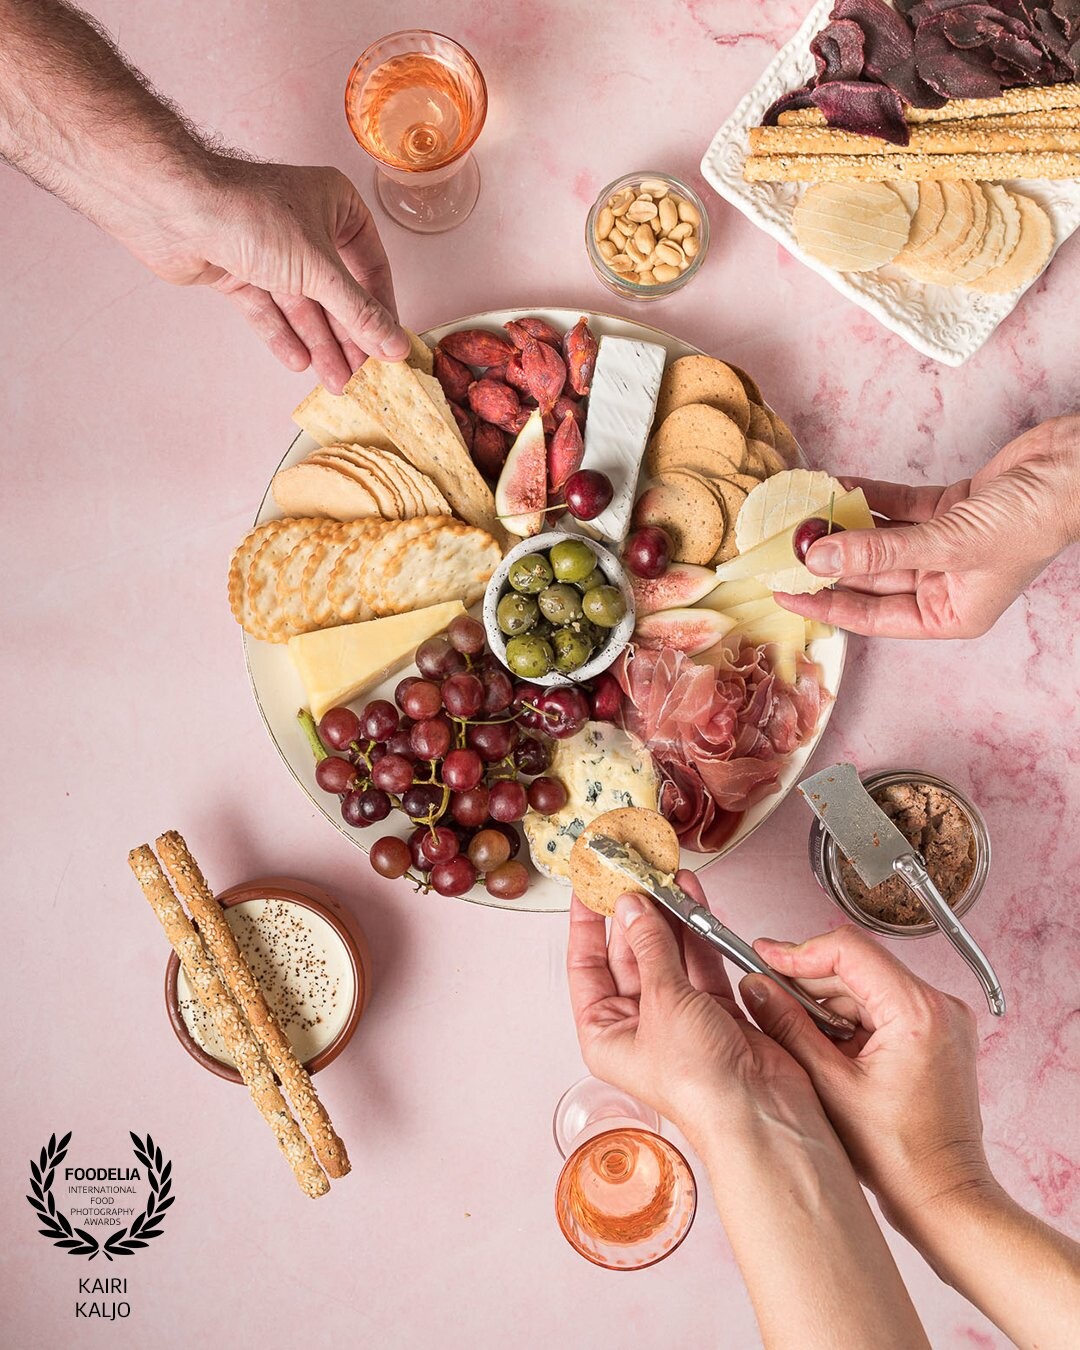 Antipasto and cheese platters are a frequent sighting in our house. It's an easy meal requring minimum  effort. Great for dinner with the family or entertaining guests.....and even better when consumed with a good quality wine.